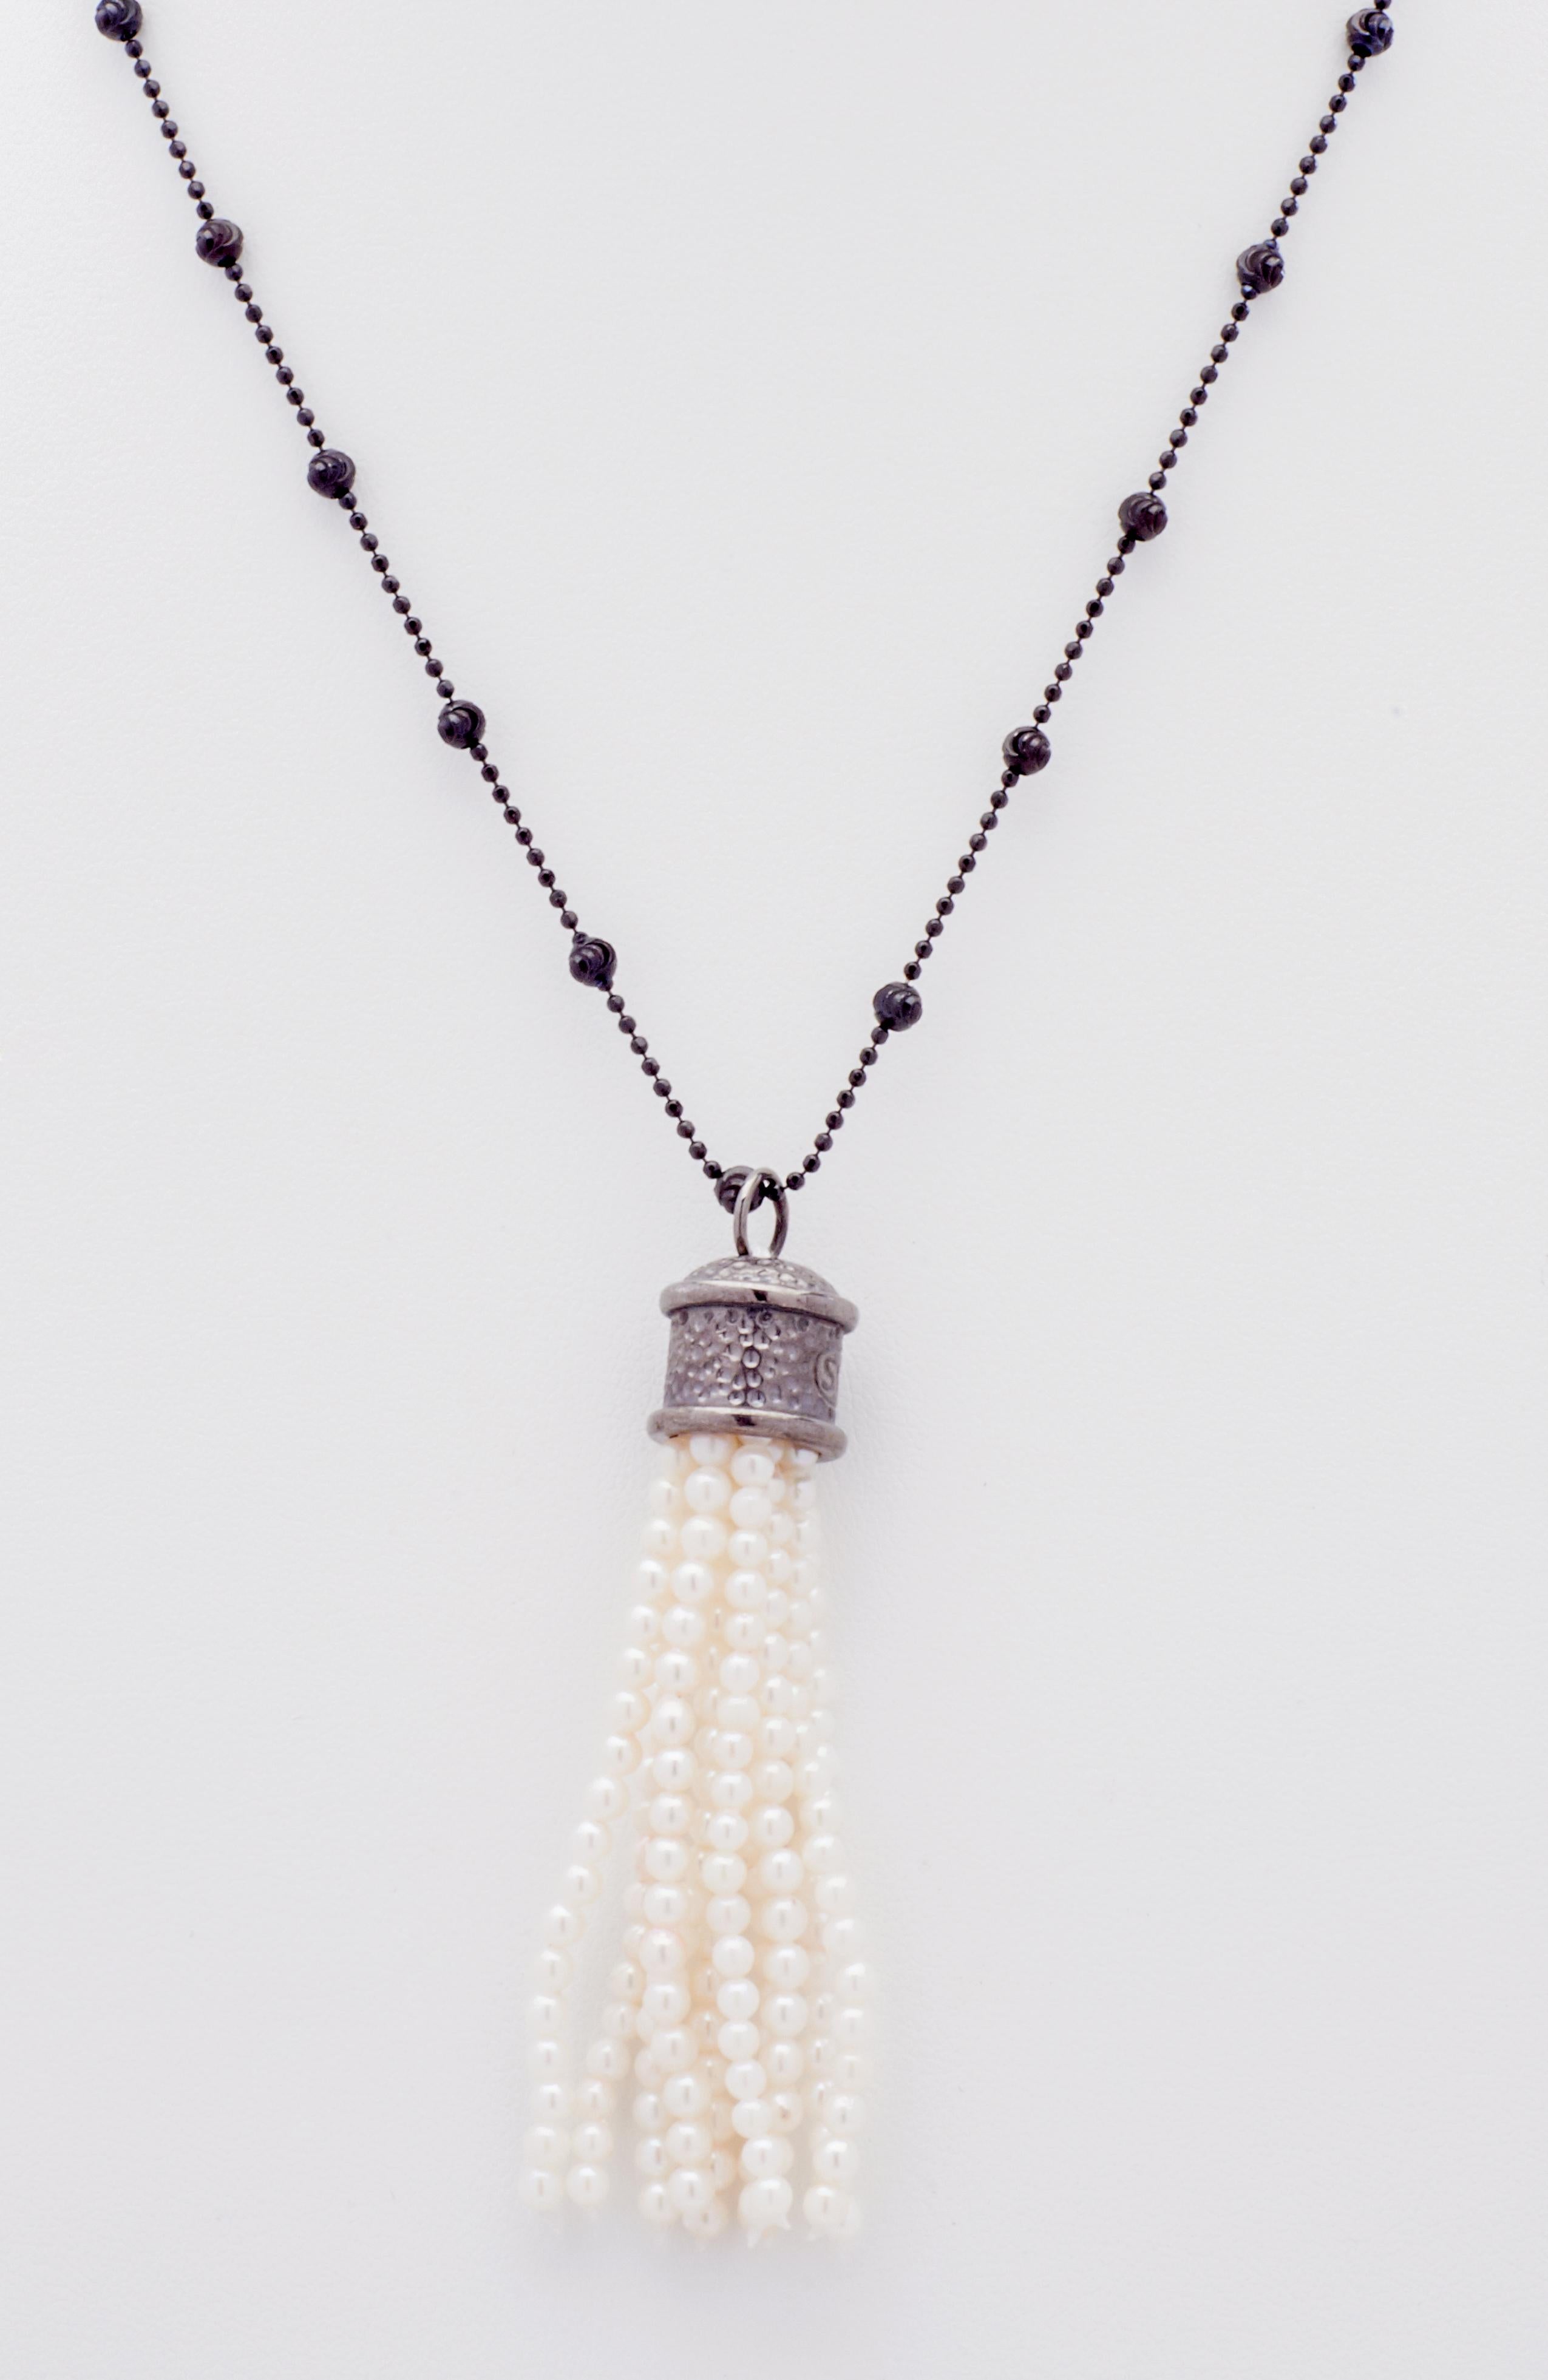 Signature  Susan VanGilder, the versatile twenty two inch Black Silver Chain Necklace leads to a hand-crafted Genuine Akoya Pearl Signature signed Tassel Cap which is made of over two hundred 2.75 mm Pearls . The Necklace is finished with a Sterling